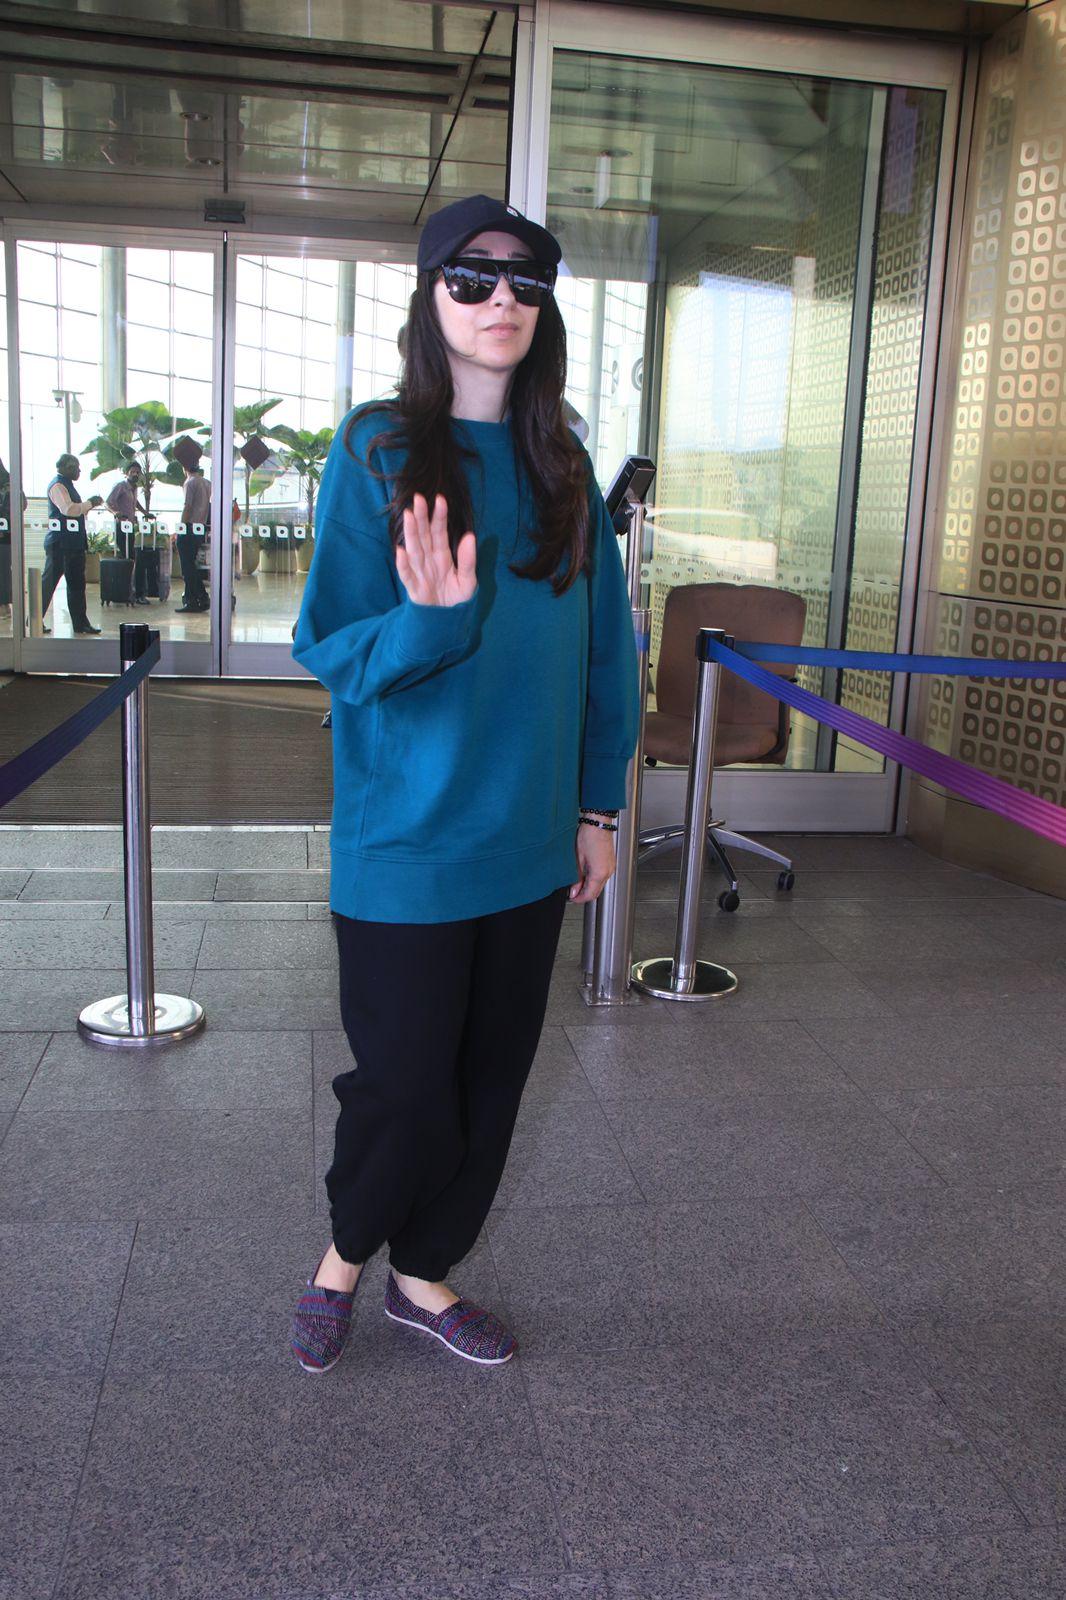 Karisma Kapoor looked uber cool in a plain blue hoodie paired with black jeans as she was clicked at the airport